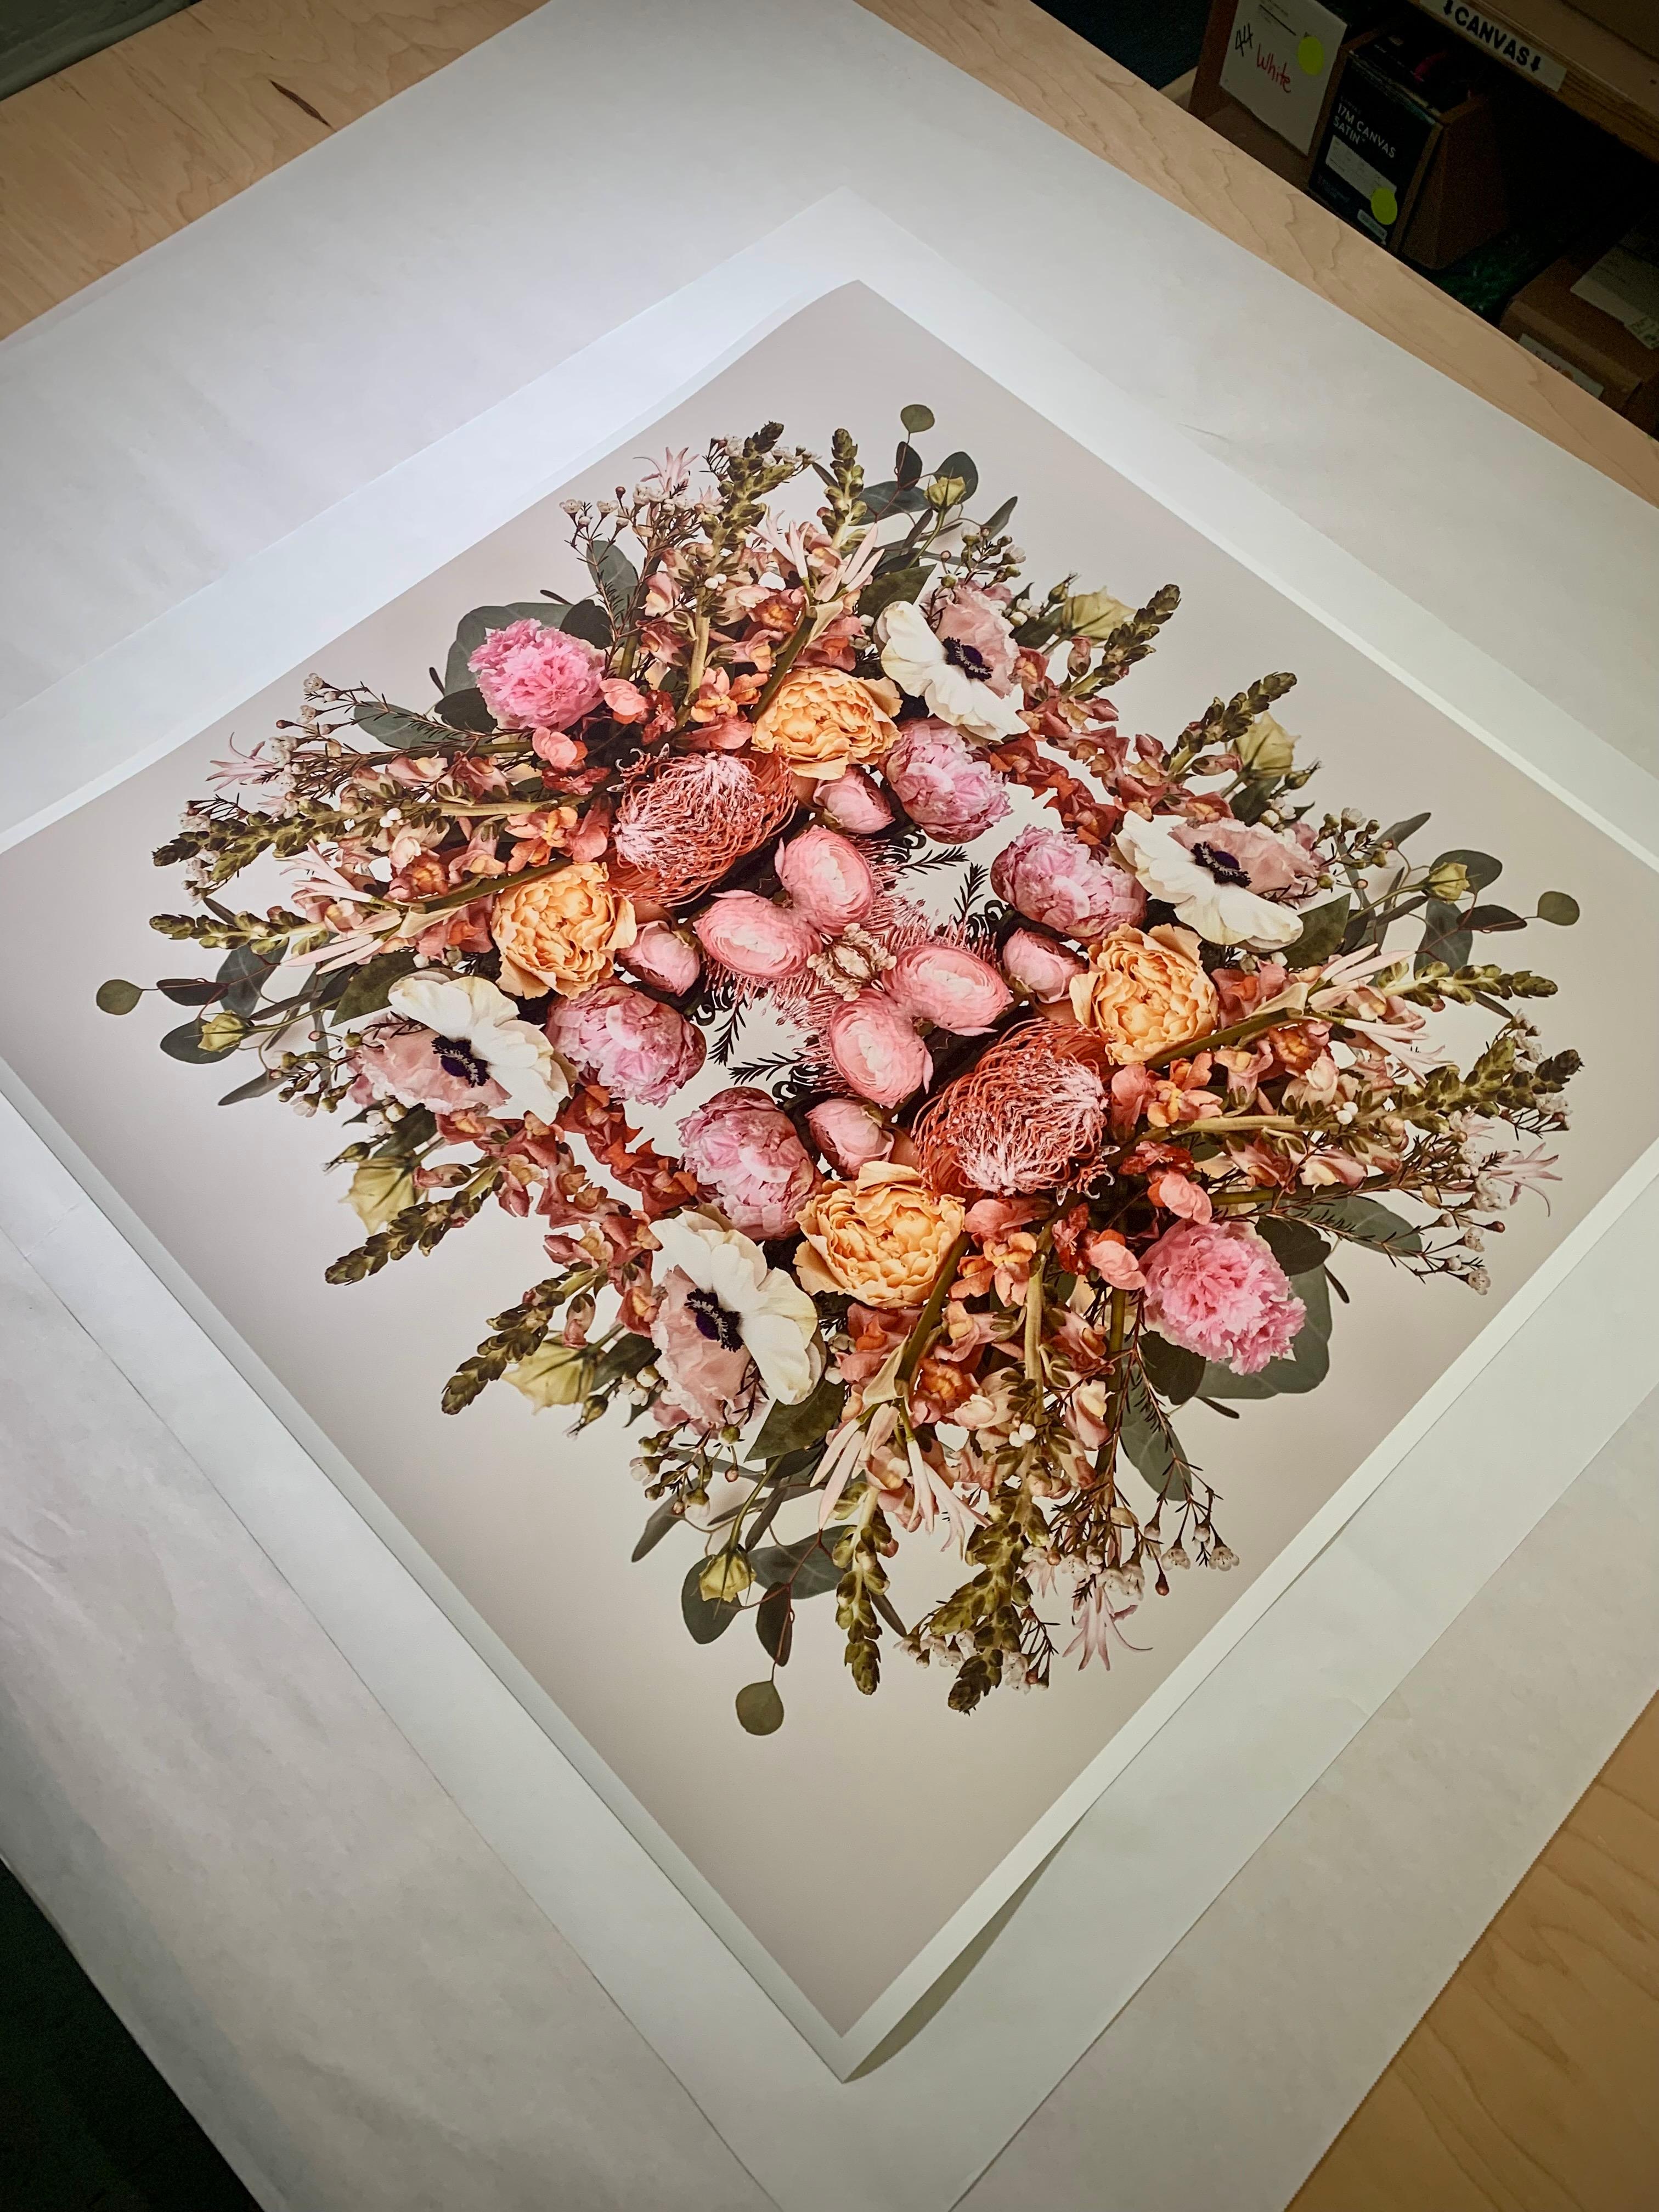 This print features the playful relationship between natural forms and botanicals. In this image Erin uses the natural composition of the pink, orange, white and green flowers, and her own collage work, to create a hypnotic mandala with the floral.